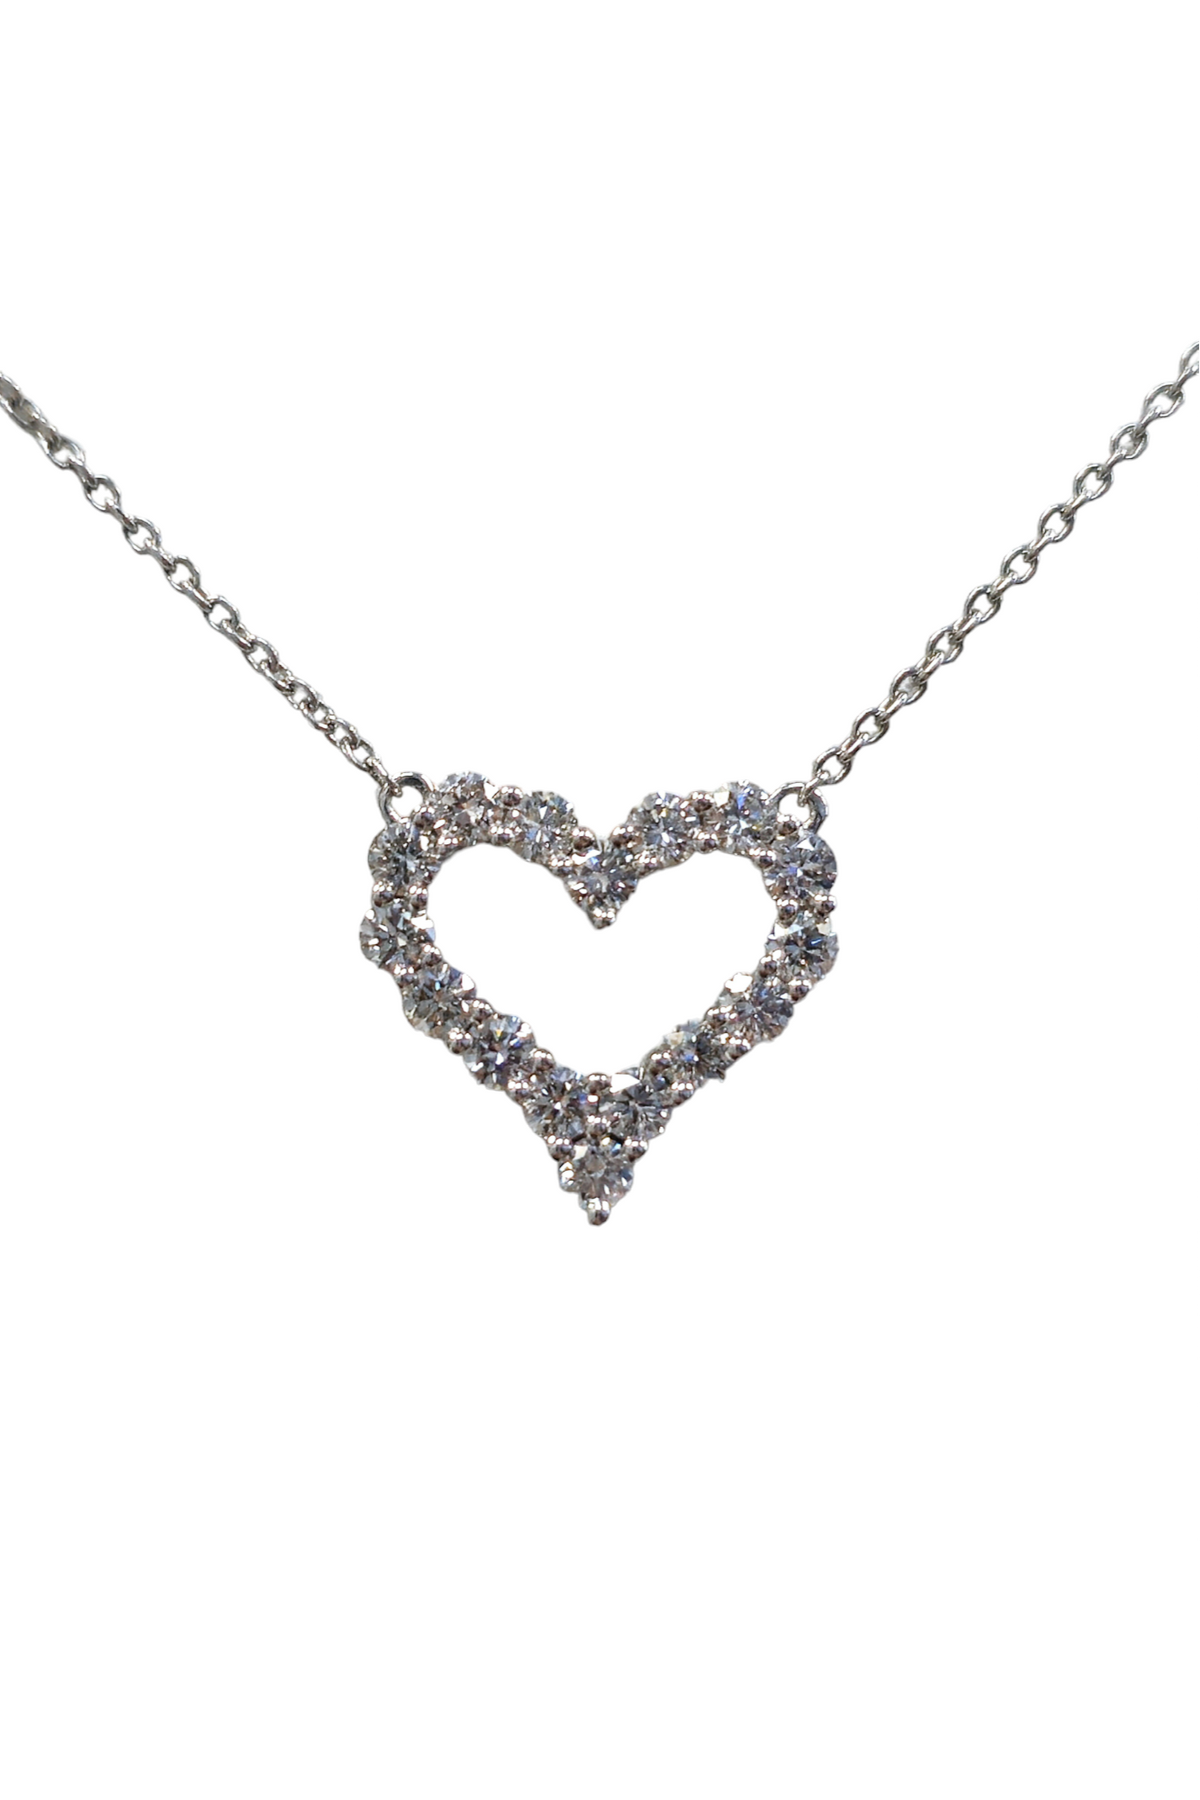 Natural Diamond Heart Pendant with adjustable length made in 14-karat white gold